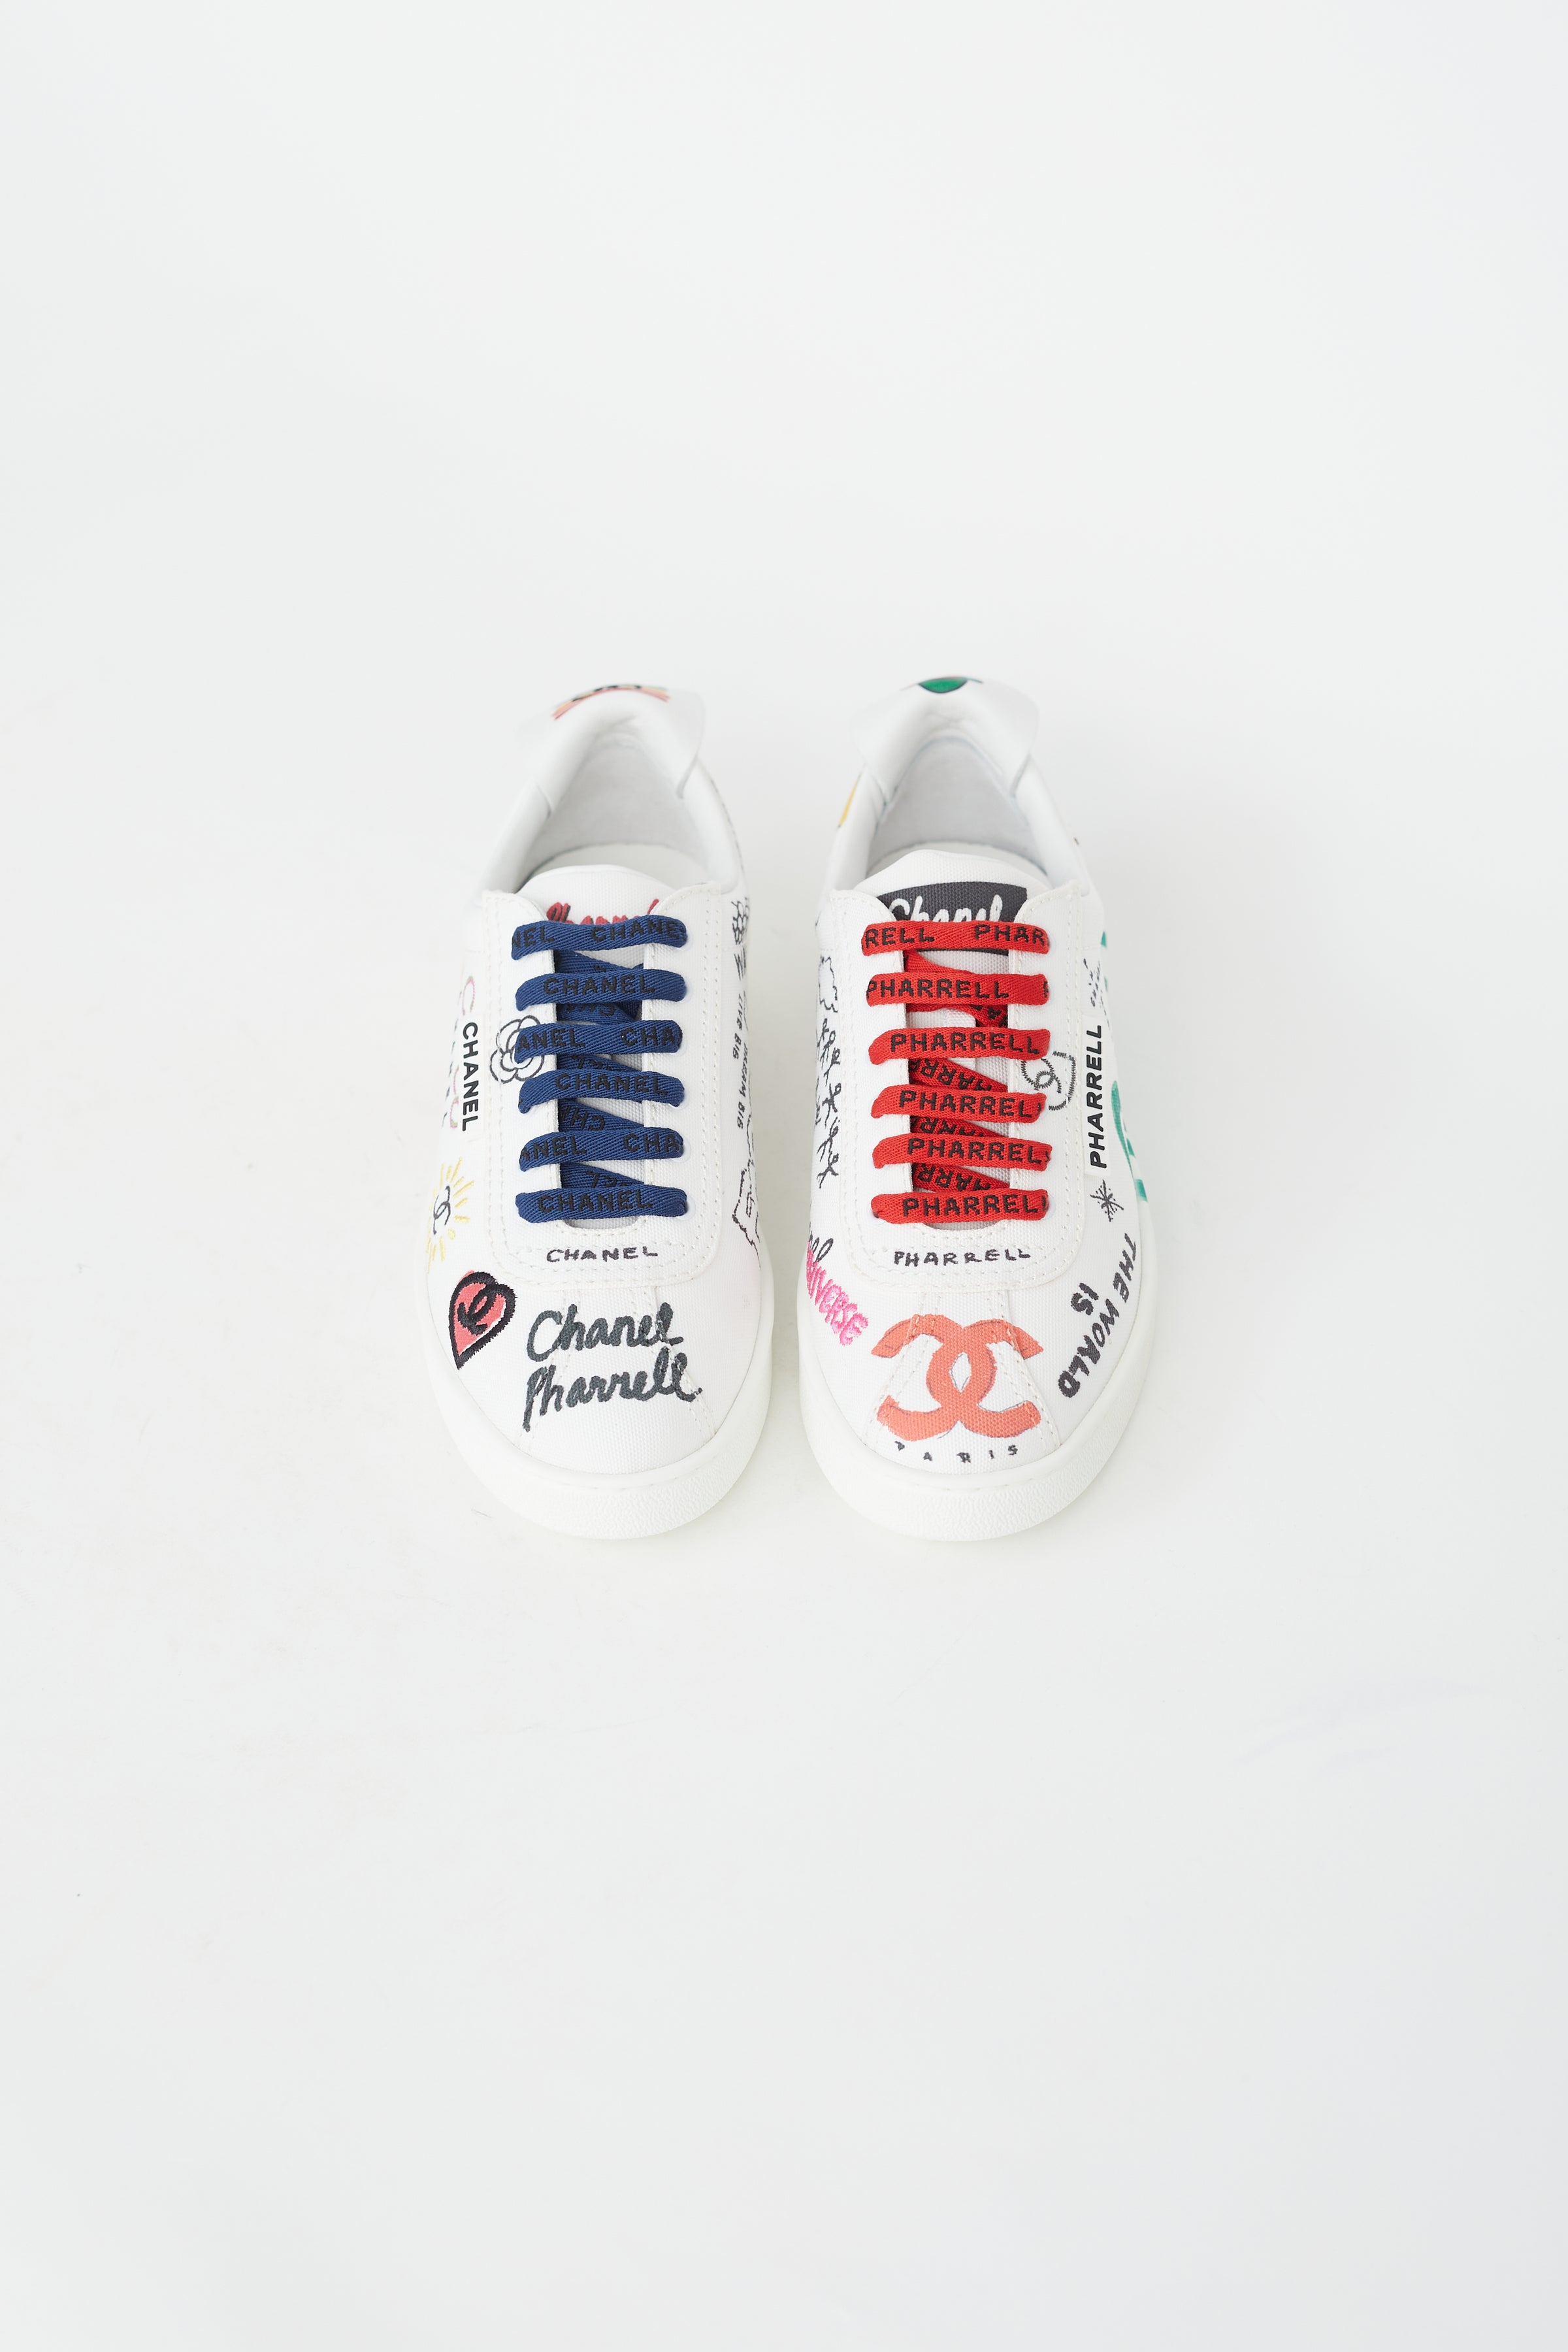 Chanel  X Pharrell White Canvas  Multicolor Low Top Sneaker  VSP  Consignment